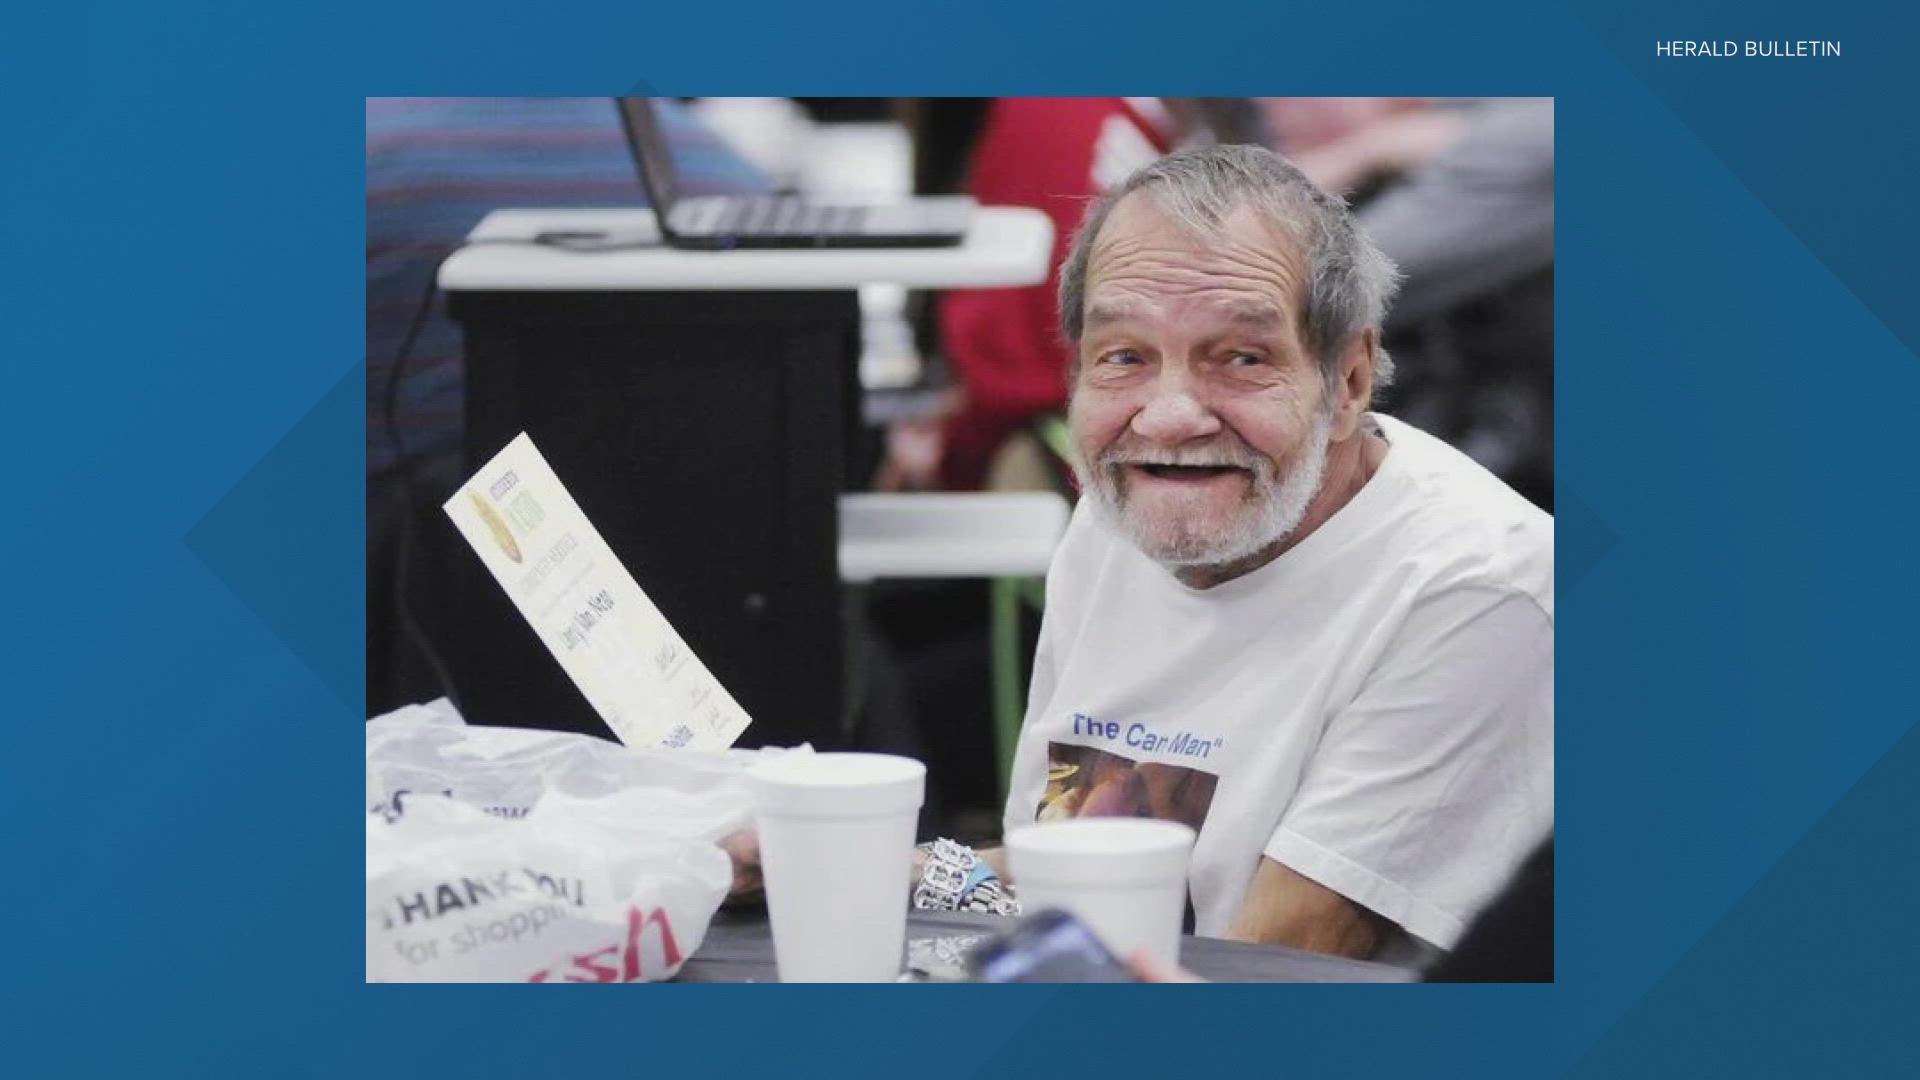 Larry VanNess, who earned the nickname "The Can Man" for collecting more than 27 million can tabs for the Ronald McDonald House, died Monday at the age of 75.